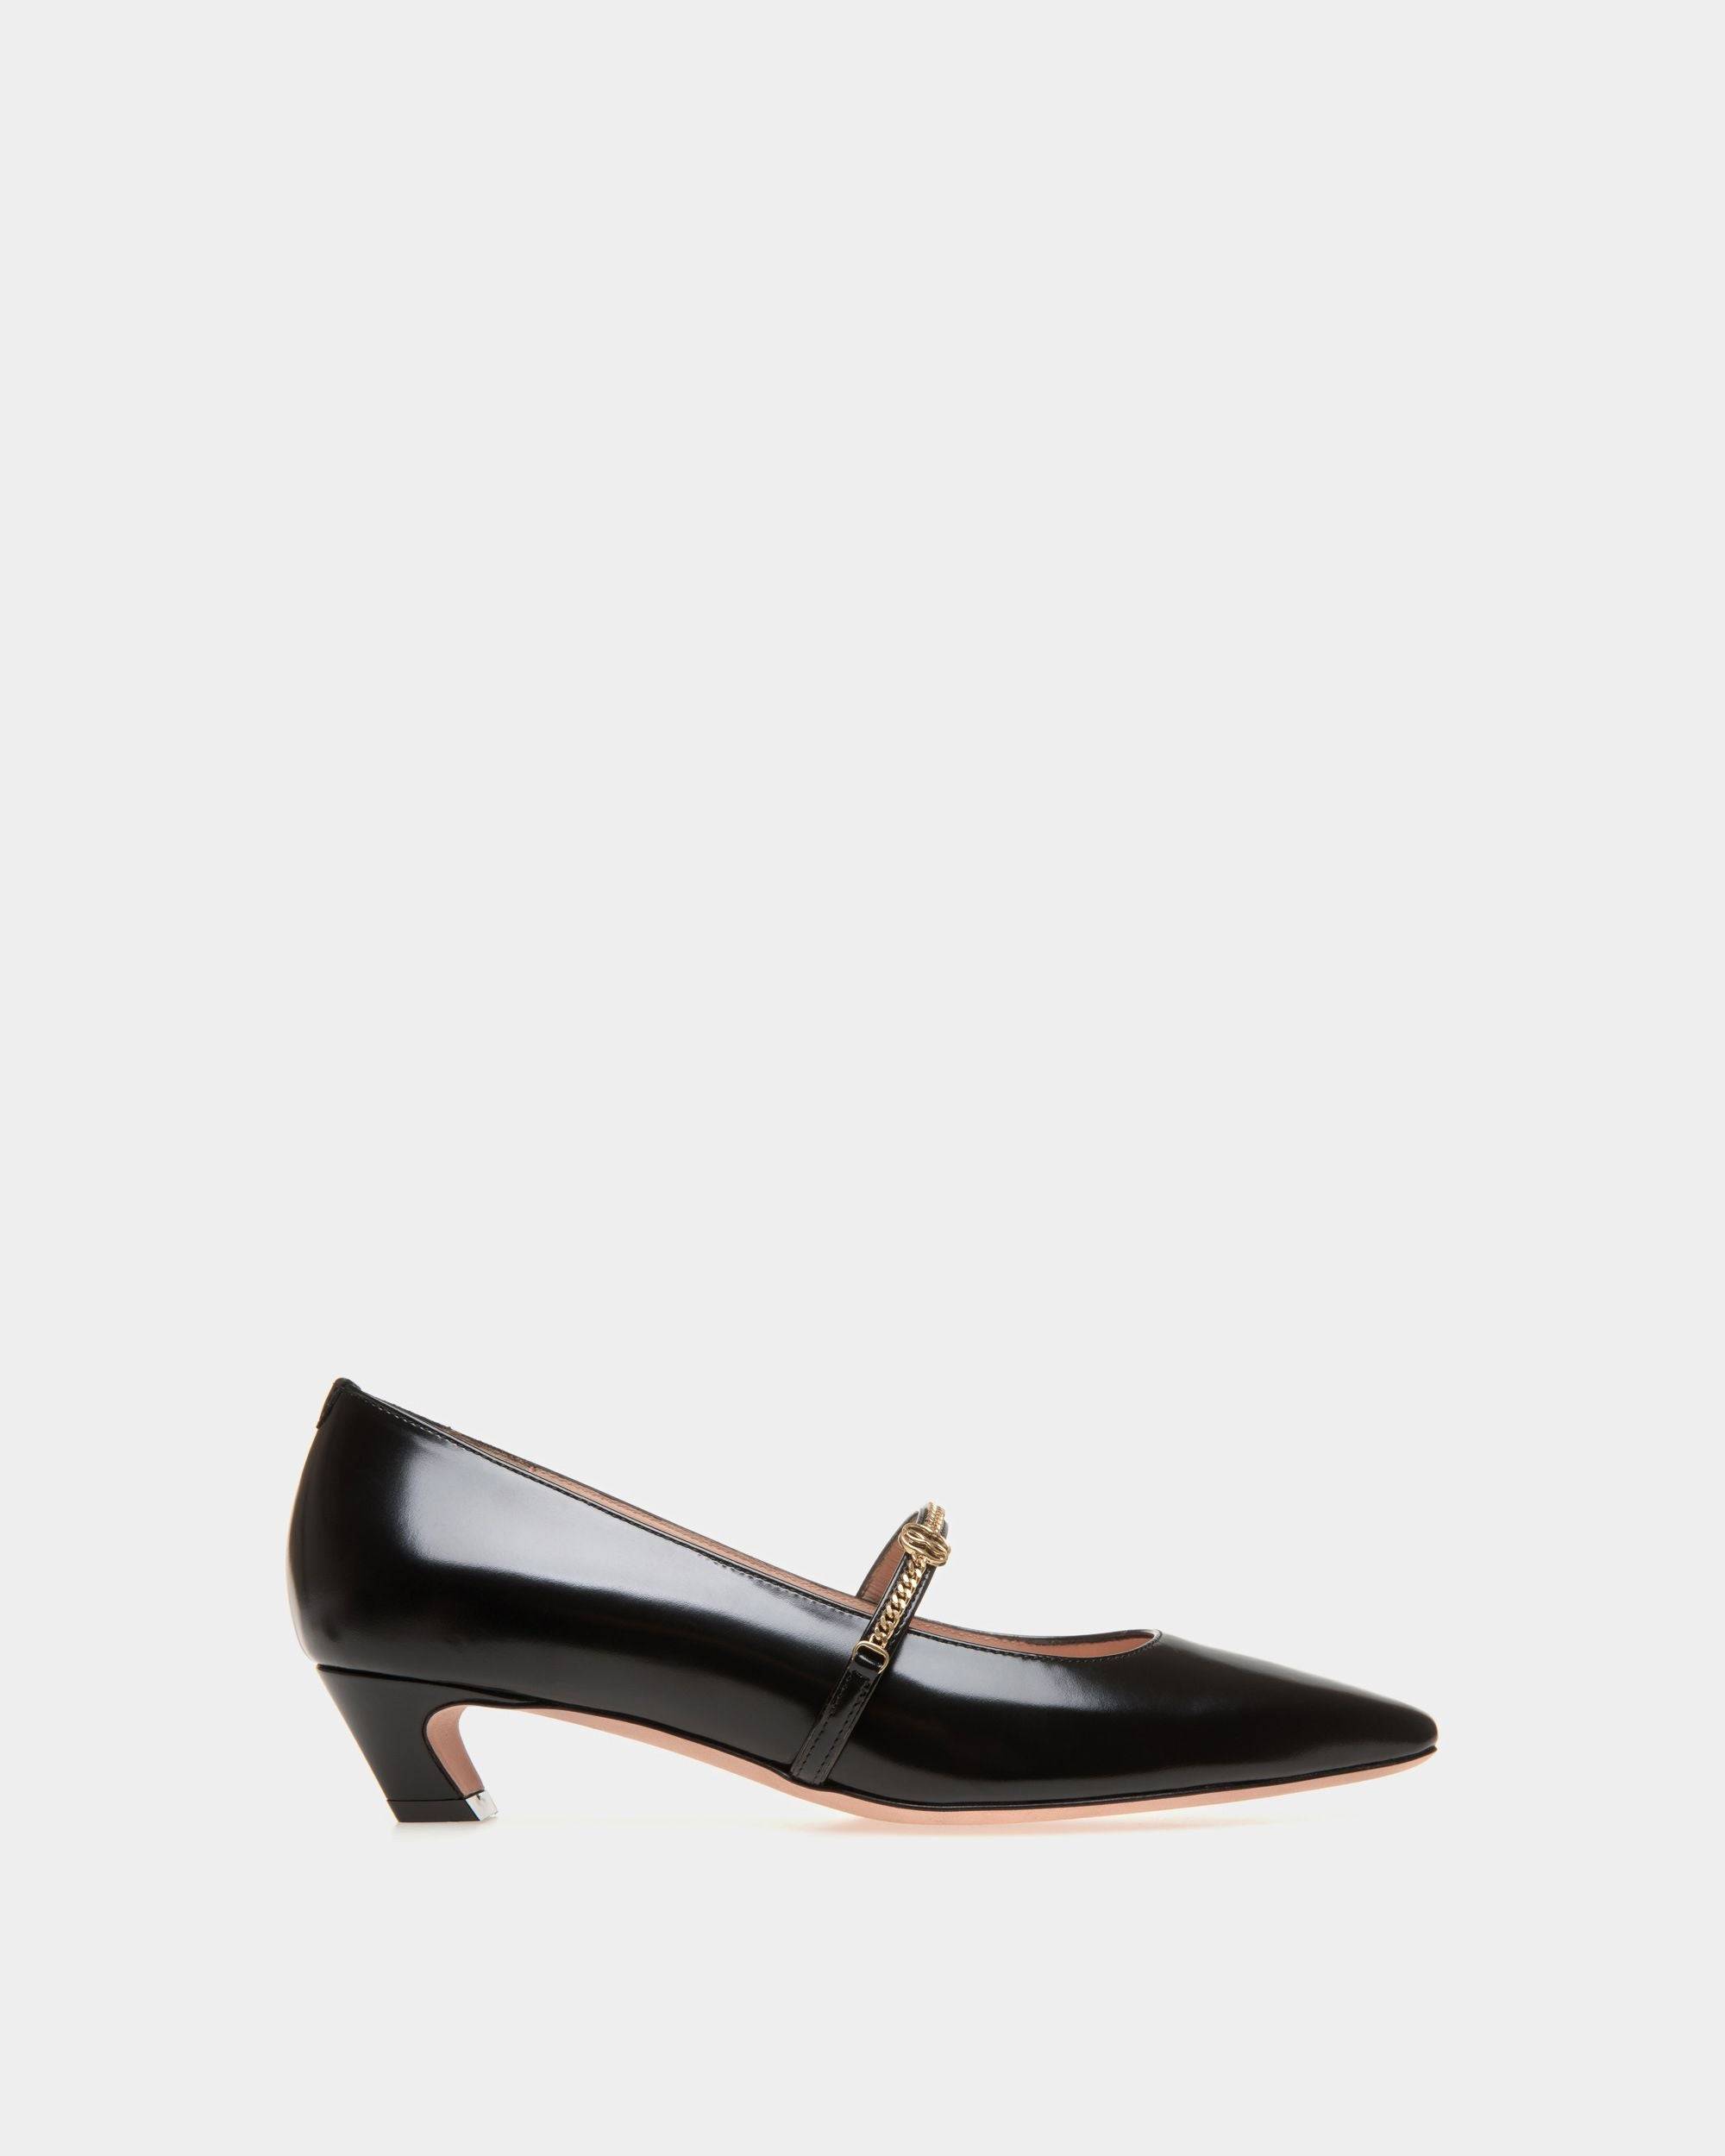 Sylt | Women's Mary-Jane Pump in Black Leather | Bally | Still Life Side